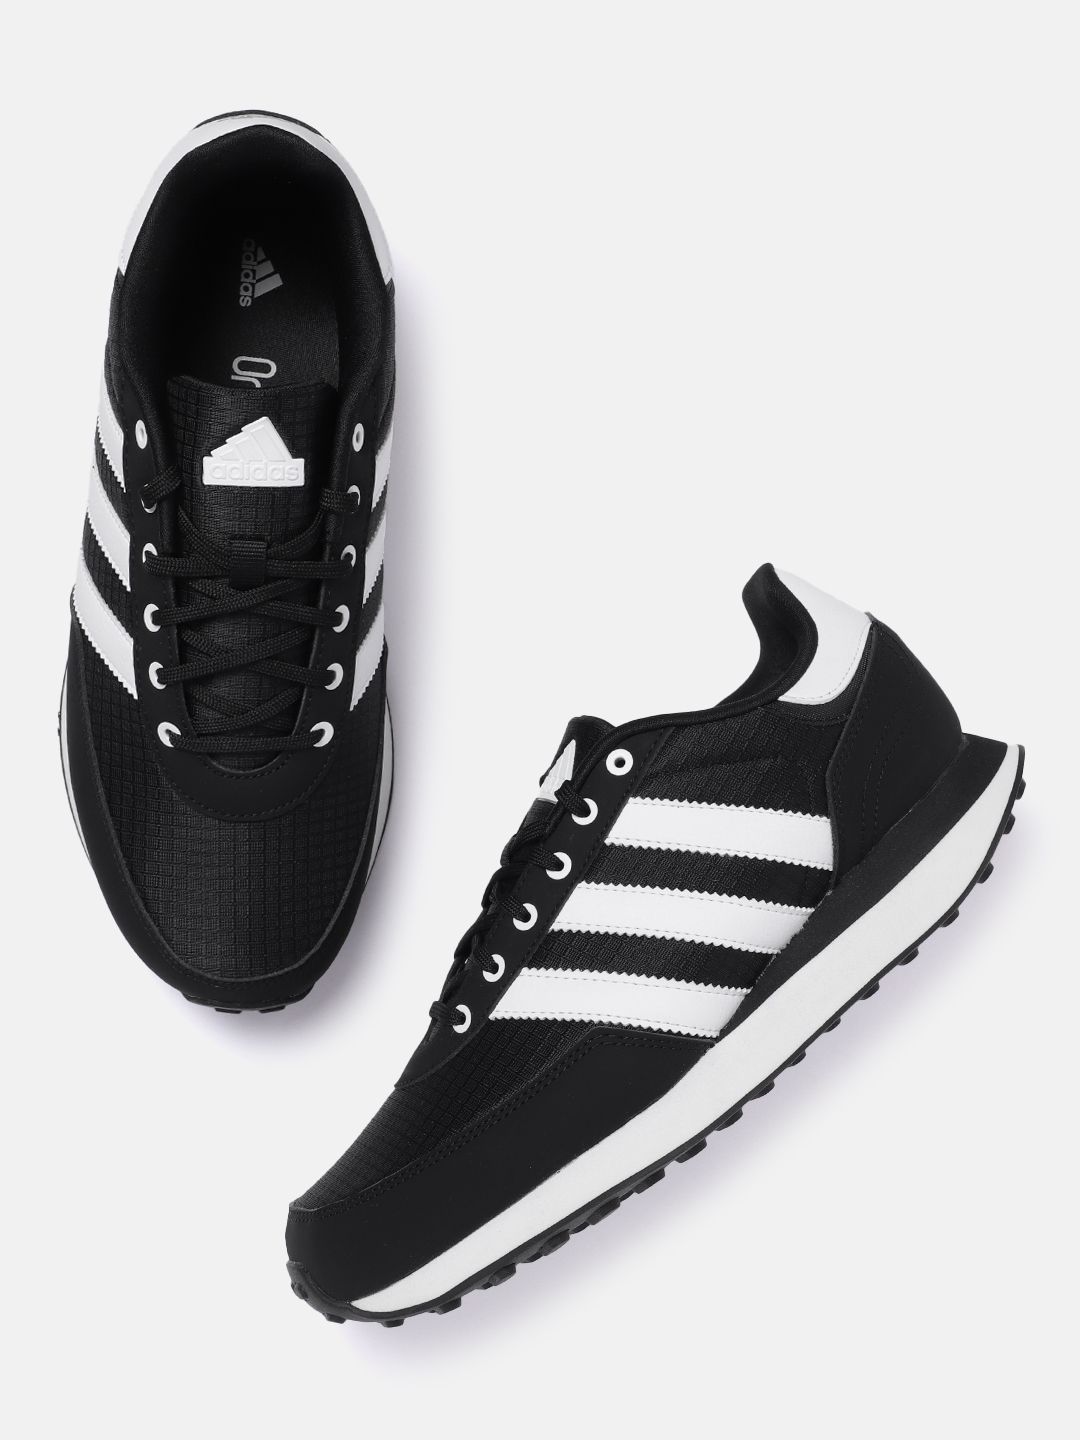 ADIDAS Men Woven Design Round-Toe 90s Cut-Legacy Running Shoes with Striped Detail